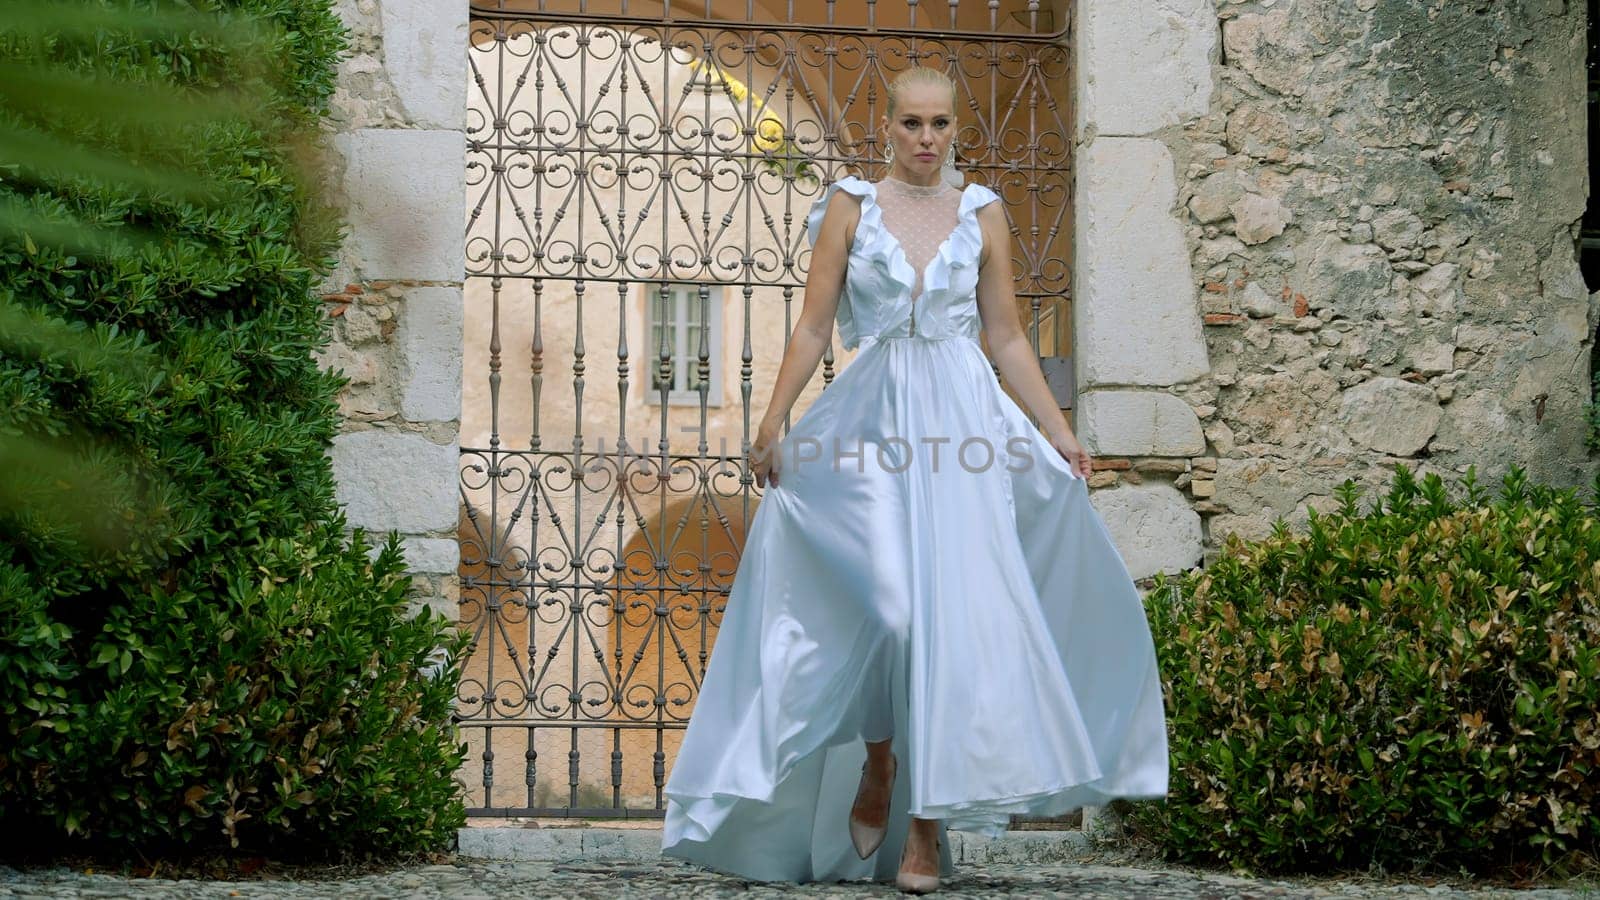 Bride walking in front of the gate in the city park. Action. Beautiful woman in white long dress near stone building